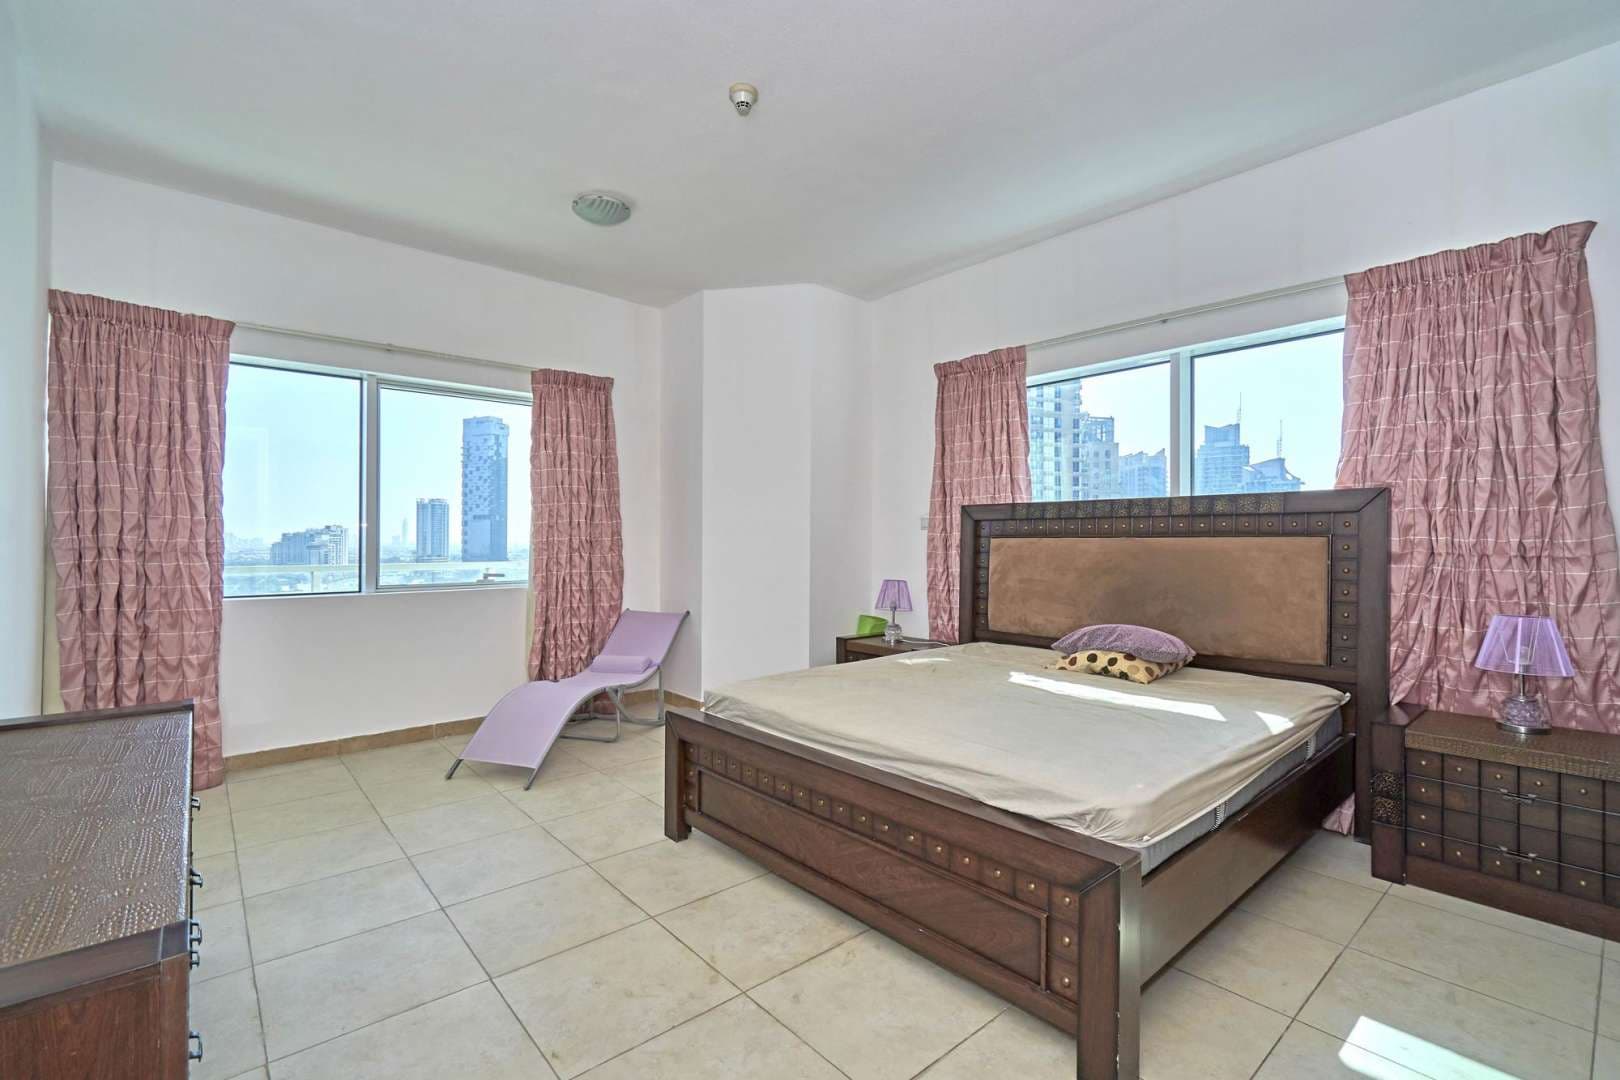 2 Bedroom Apartment For Rent Mag 218 Tower Lp05532 11c1a52c14857000.jpg